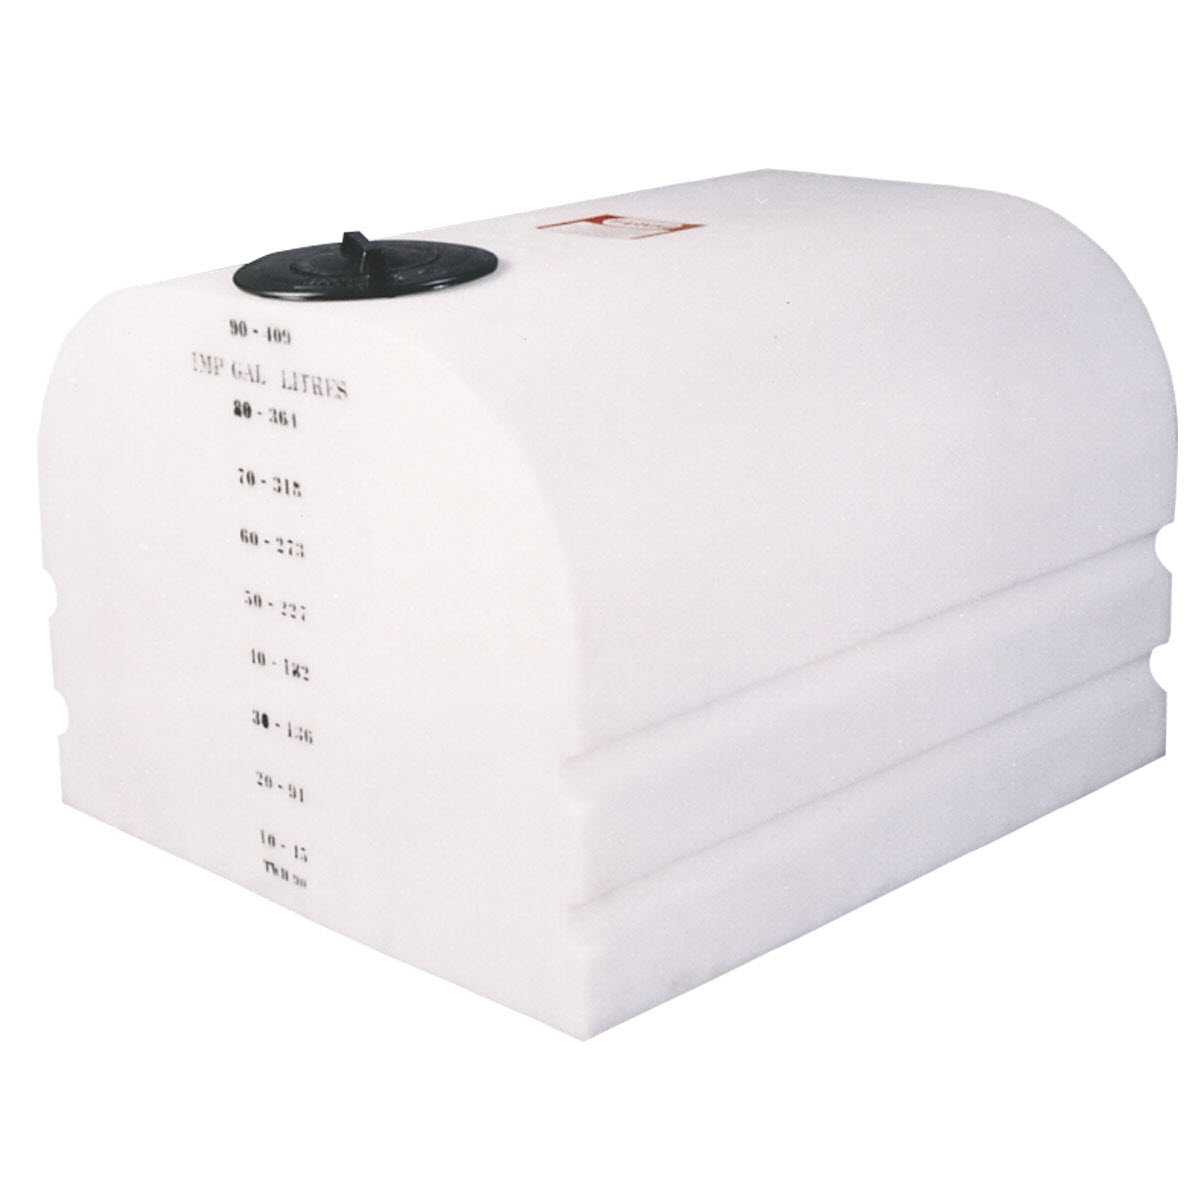 Loaf Style Transport Water Tank - White - 55 Gal